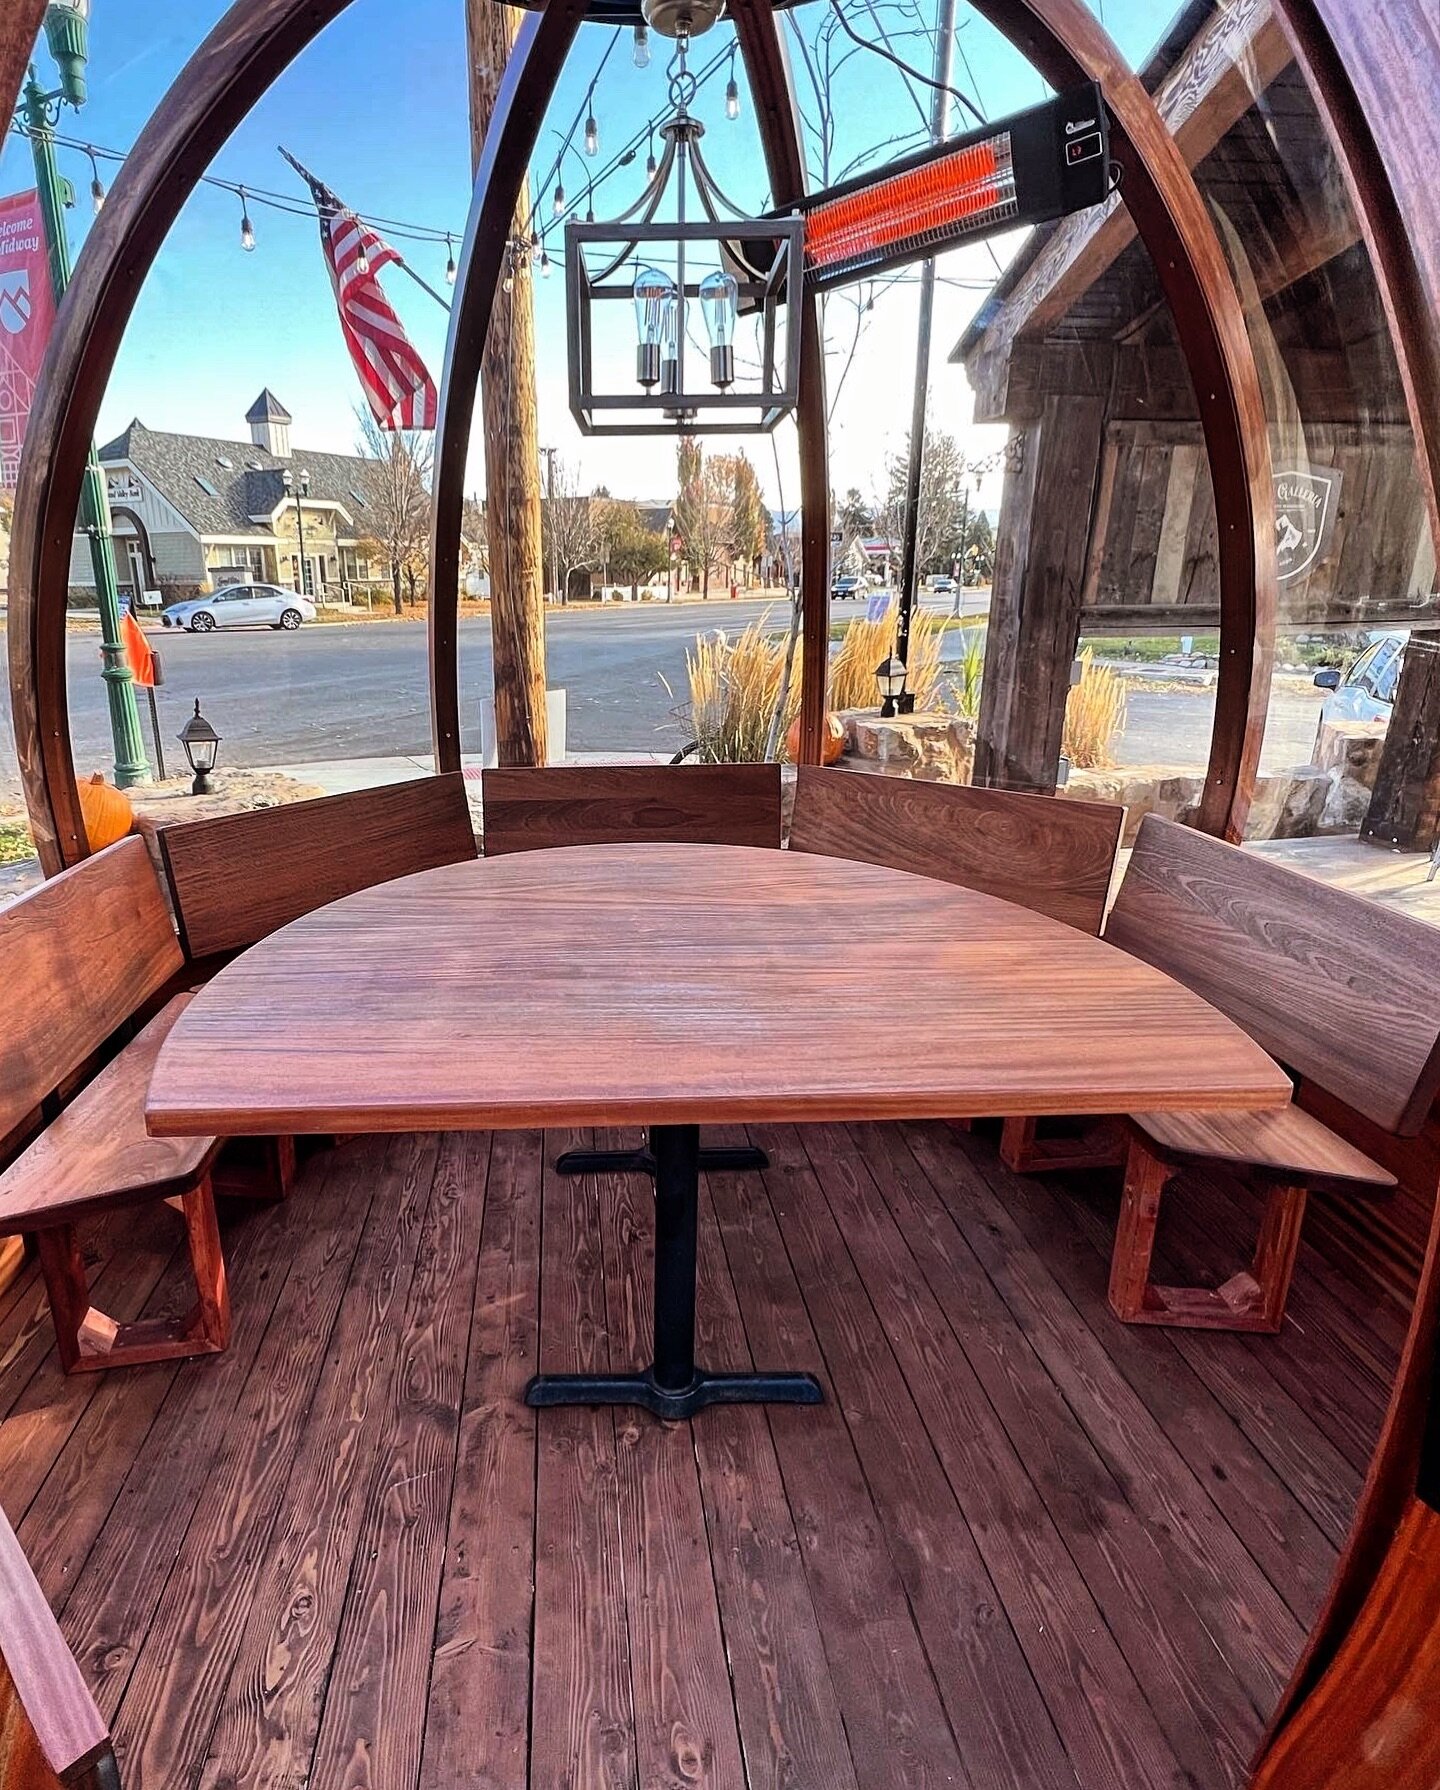 The red oak tables and benches inside our new Alpenglobes are hand crafted in the USA from sustainable hardwoods. Perfect for an evening of drinks &amp; card games, pizza night with the fam, or a romantic retreat in the seclusion of your own panorami